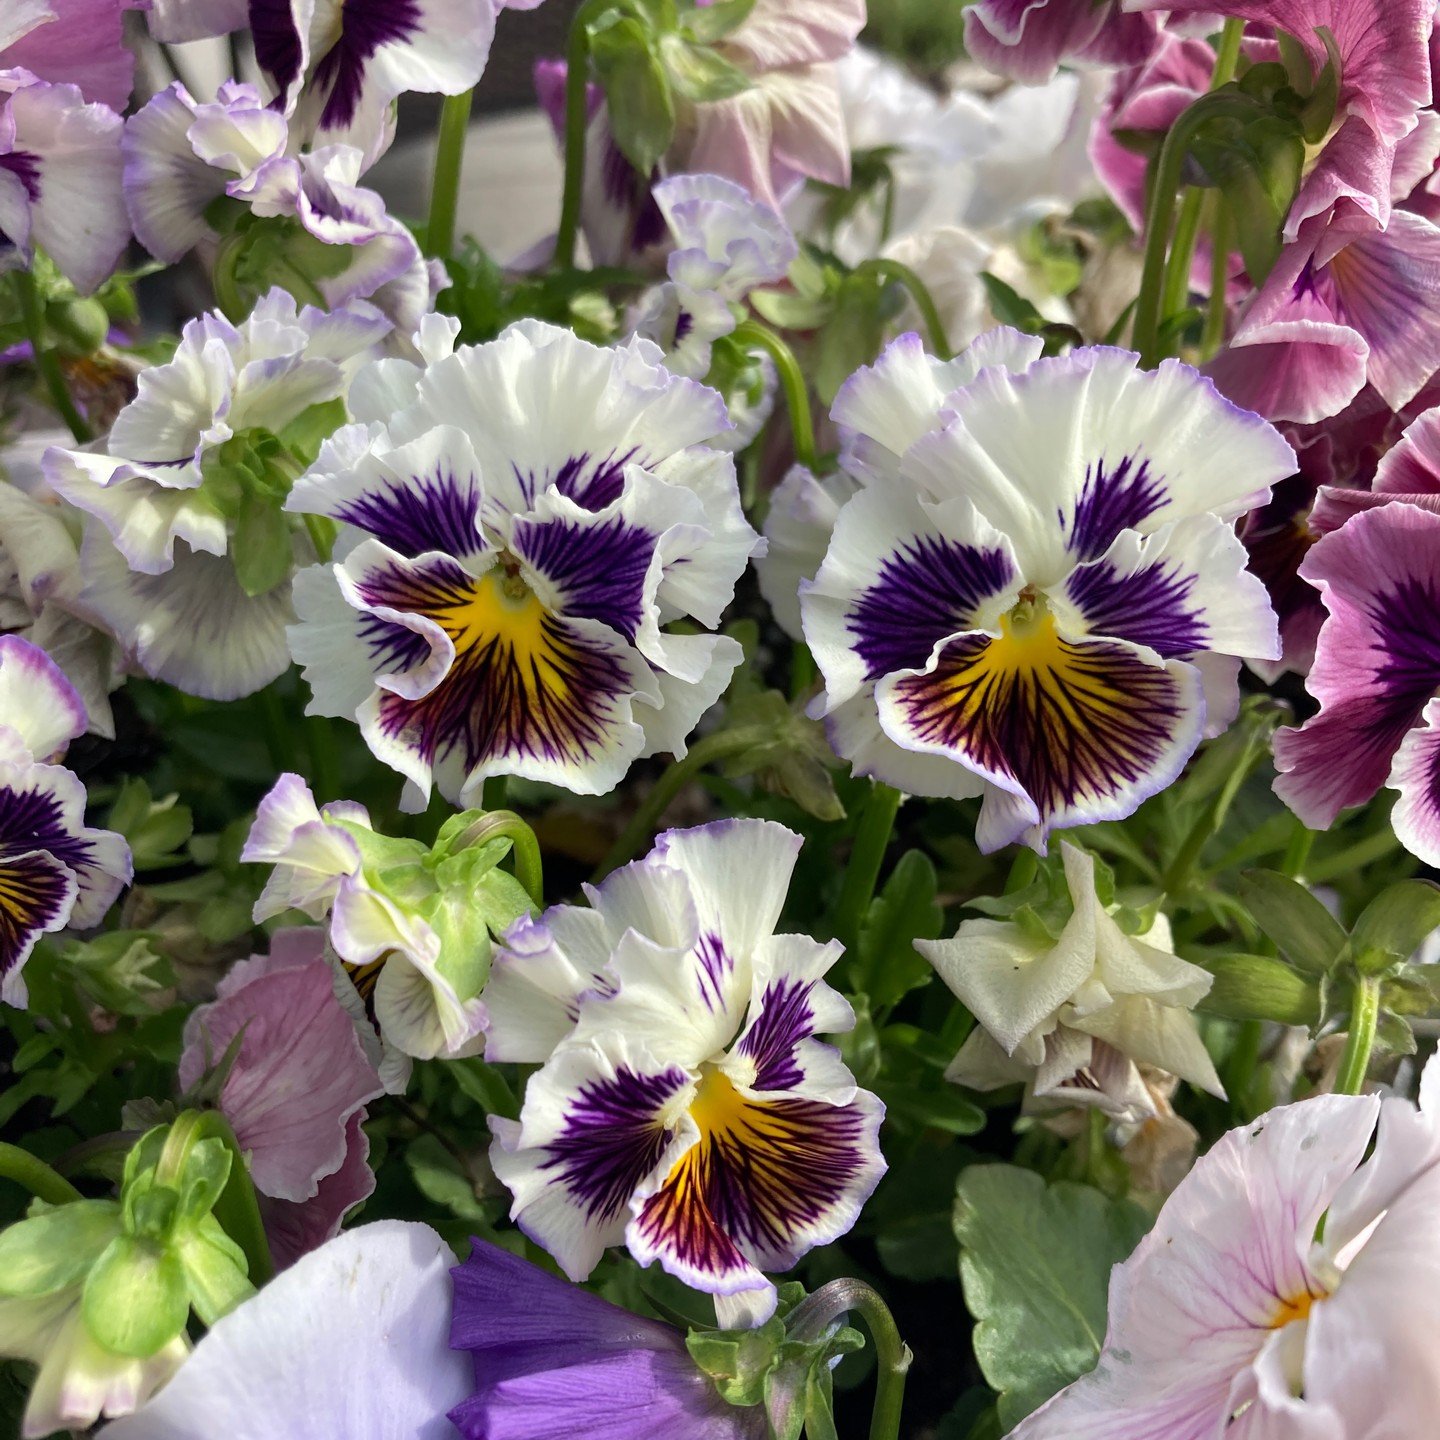 I think my gardening aesthetic has officially become &quot;little old lady.&quot; I've always loved violas... but I'm falling hard for pansies now. The more ruffly and romantic the better. Also they SMELL SO GOOD. I feel like no one talks about how g